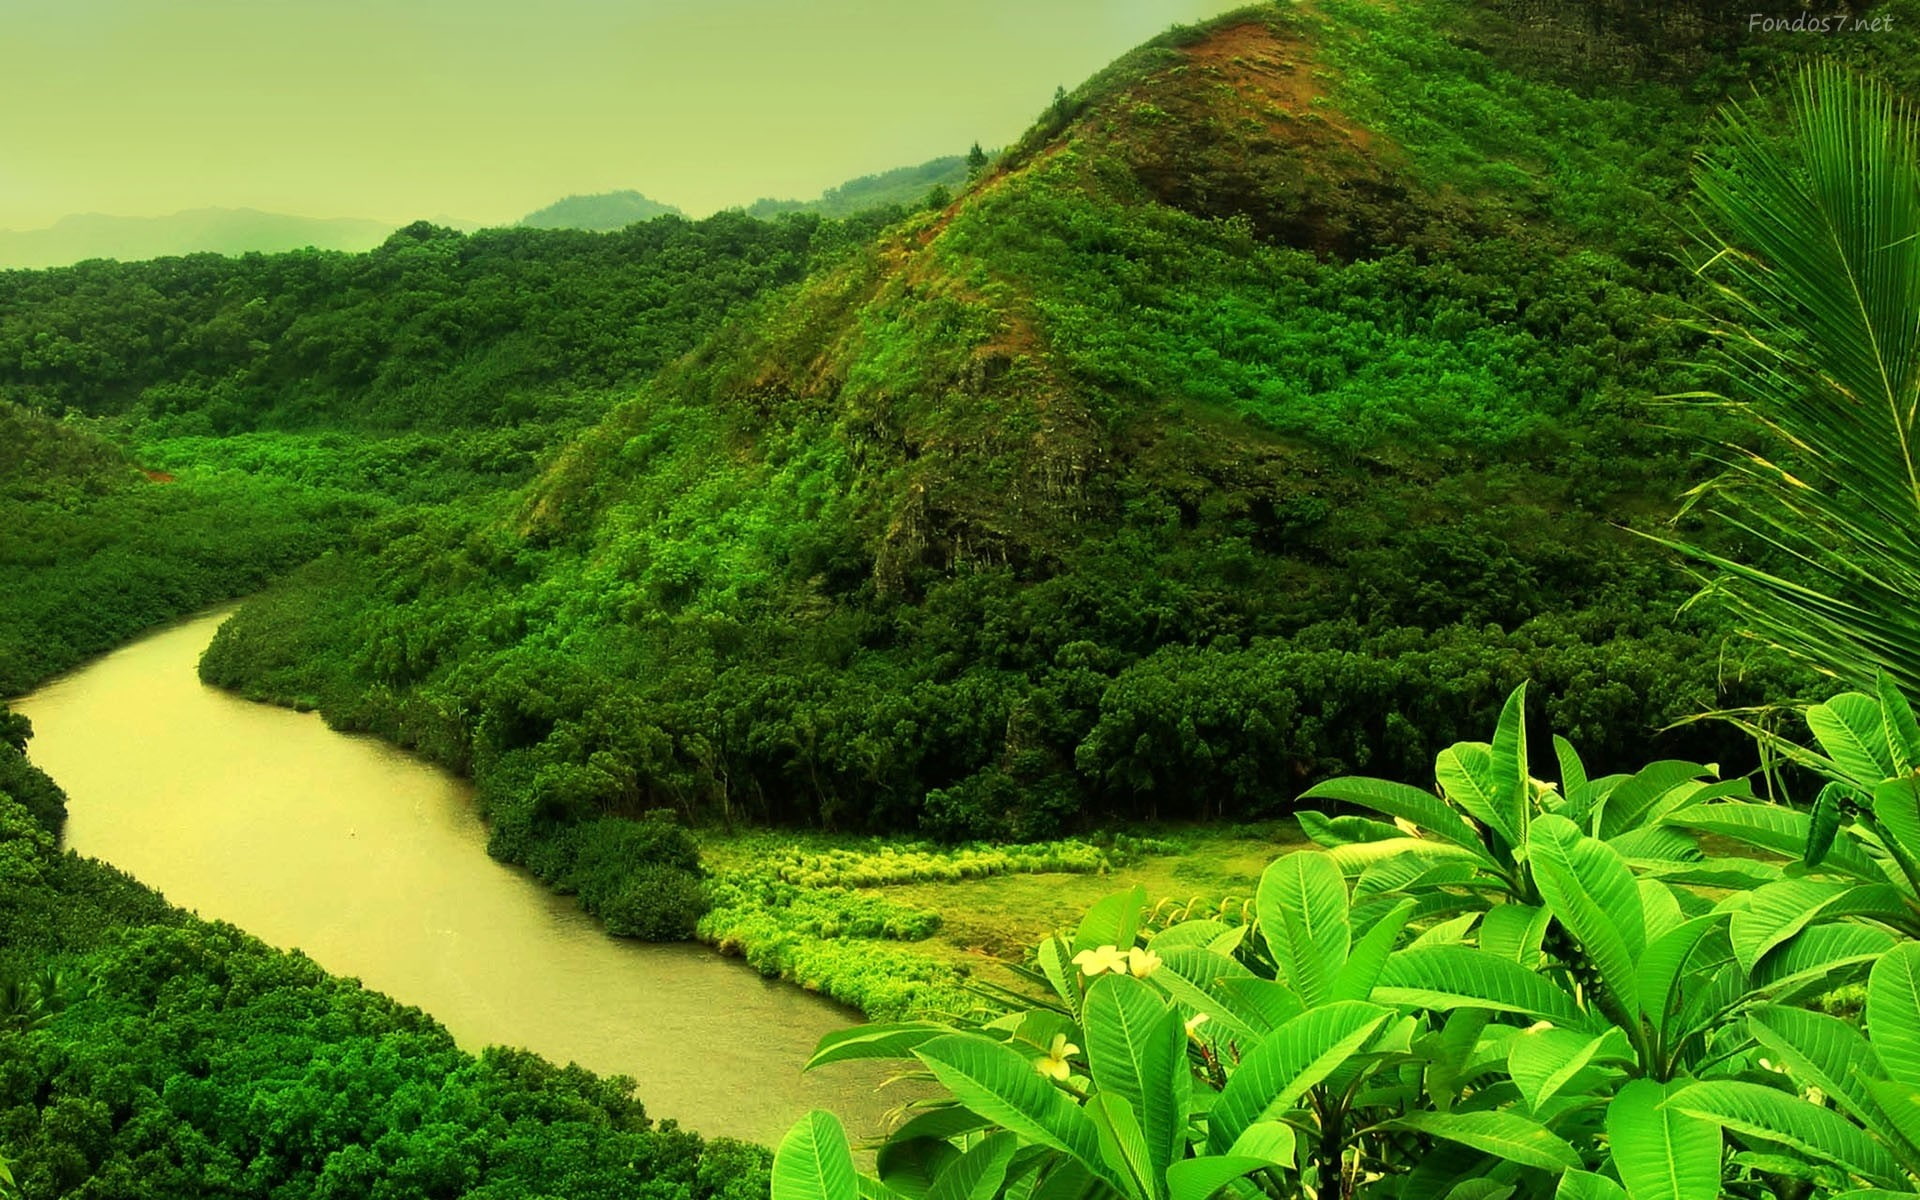 river, yellow, plant, green color, growth, tree, beauty in nature